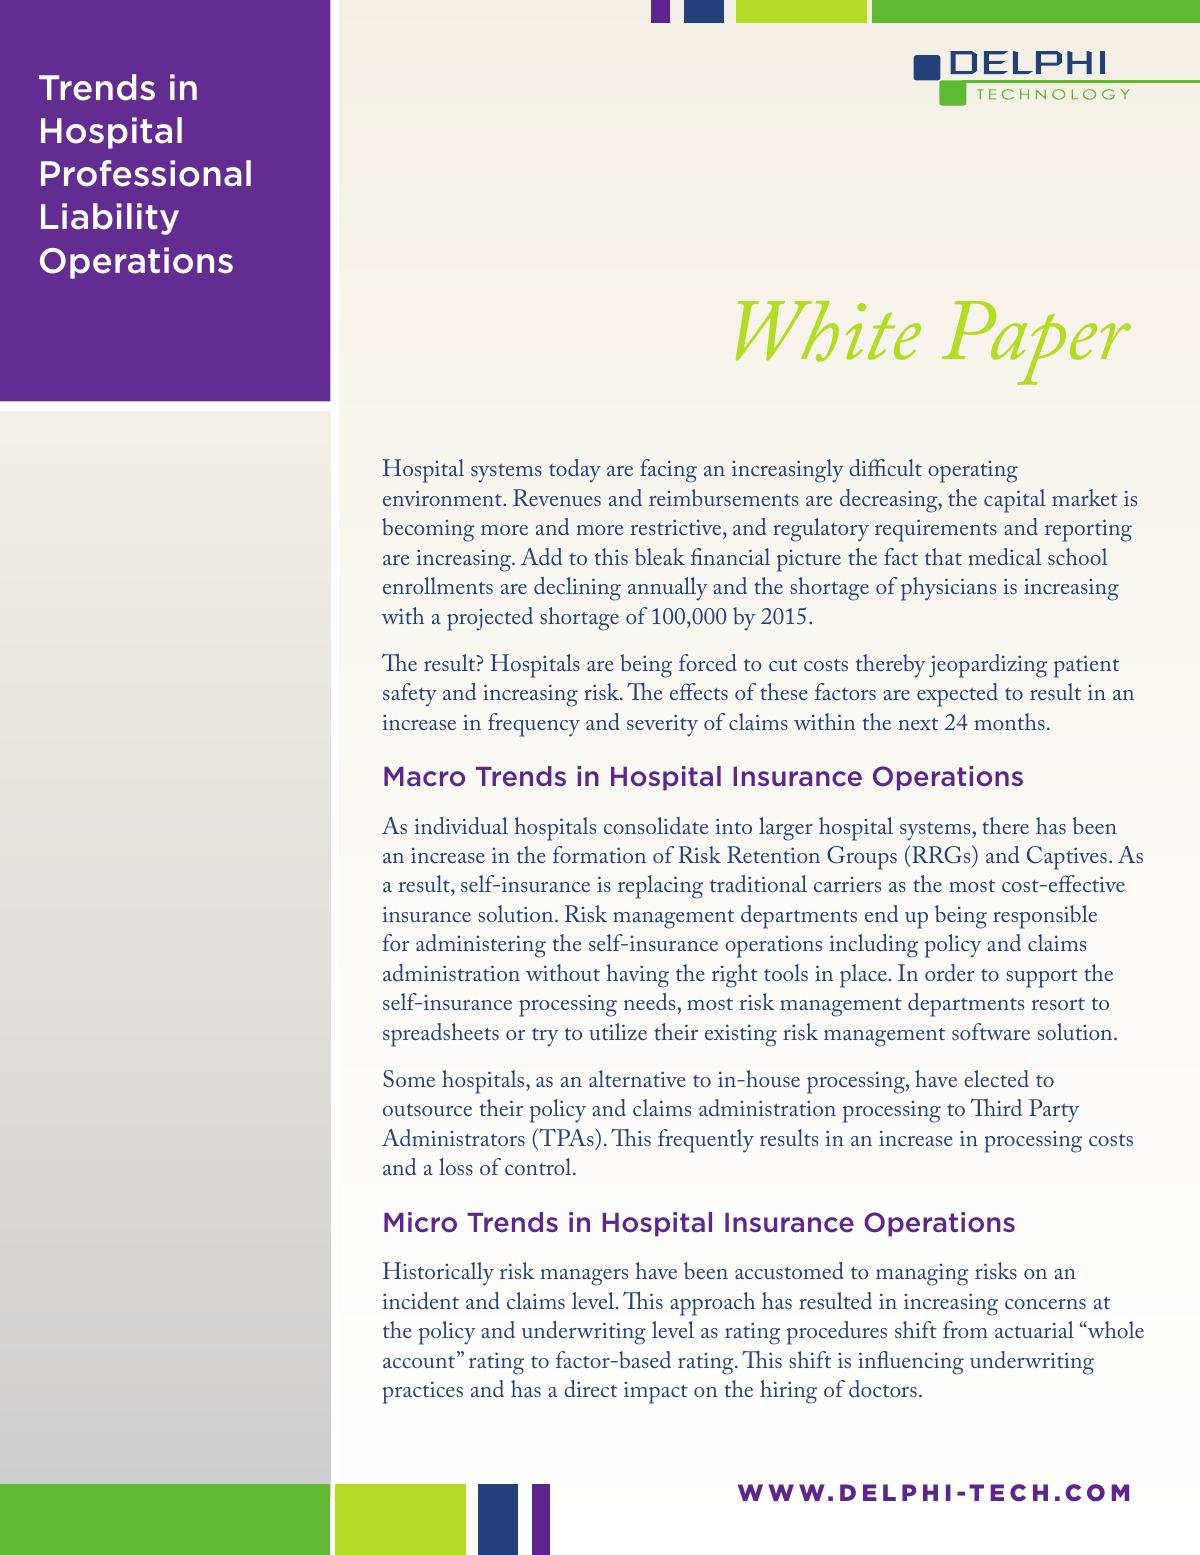 Trends in Hospital Professional Liability Operations